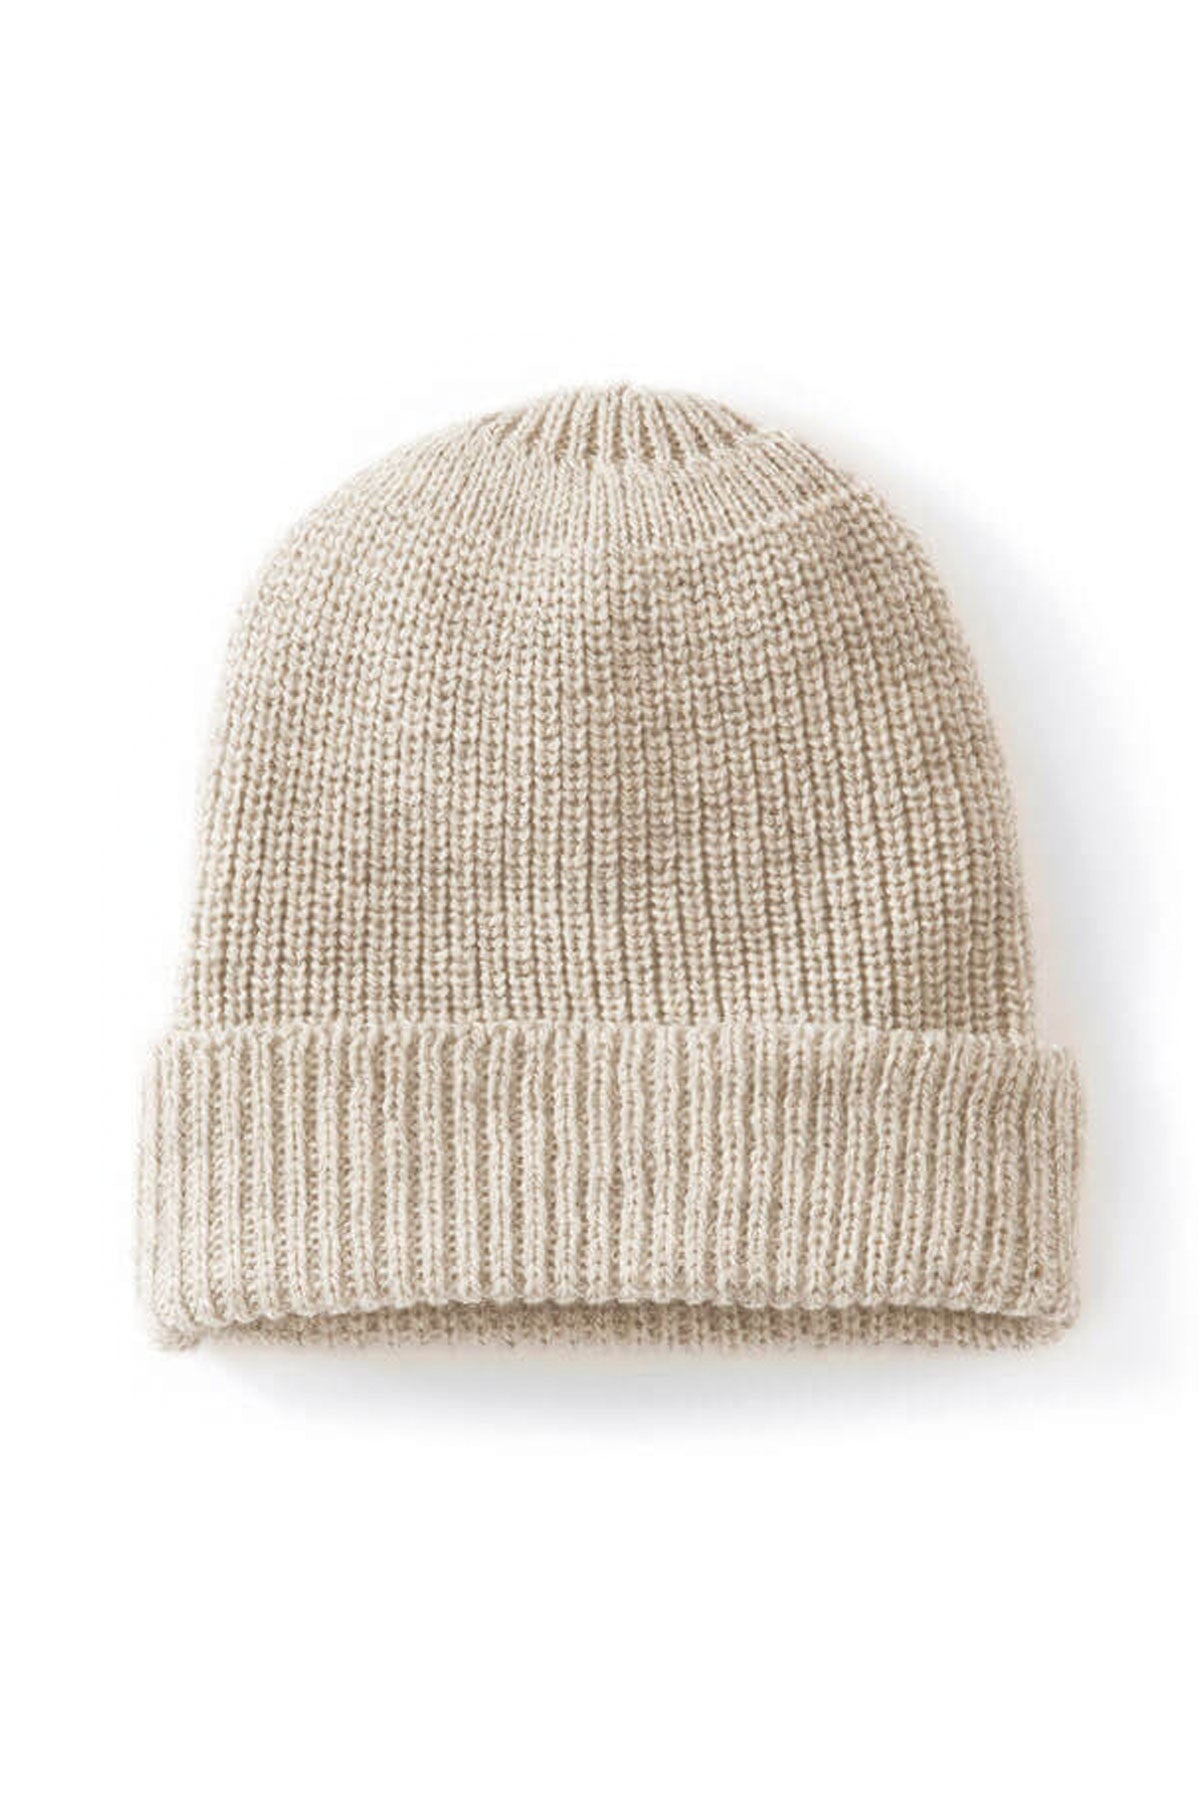 Wool Ribbed Beanie - - Mountain Boutique Shop